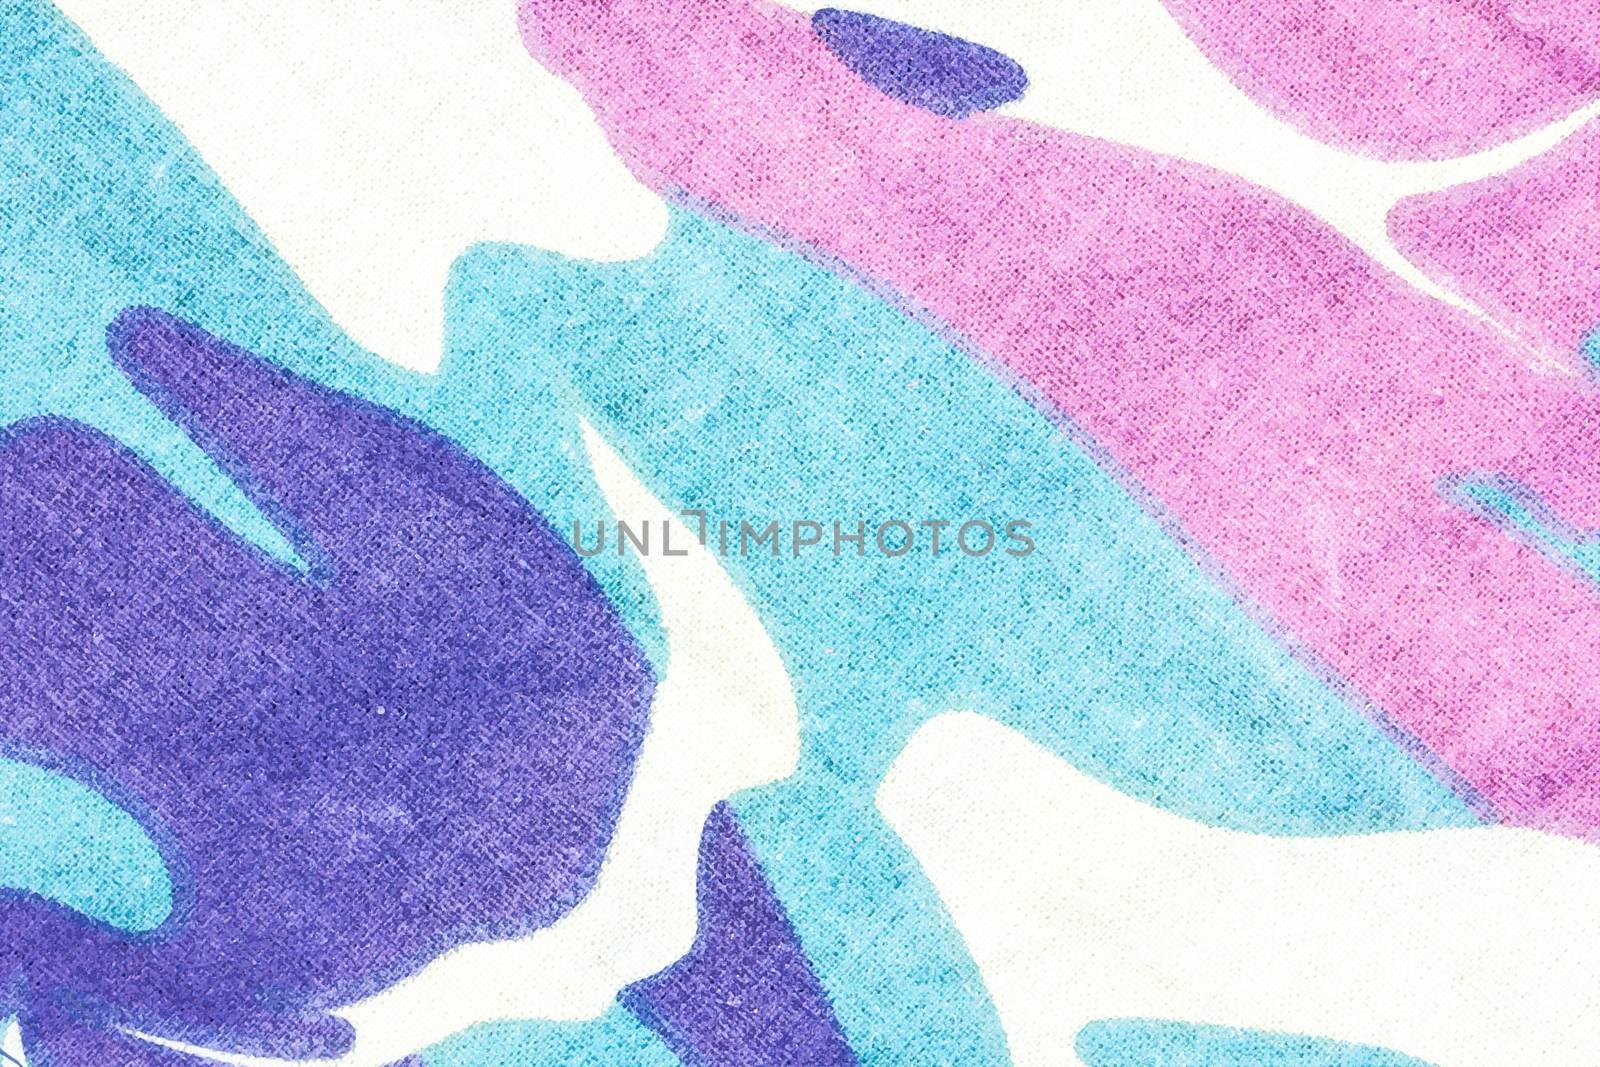 closeup of camouflage fabric texture background by a3701027